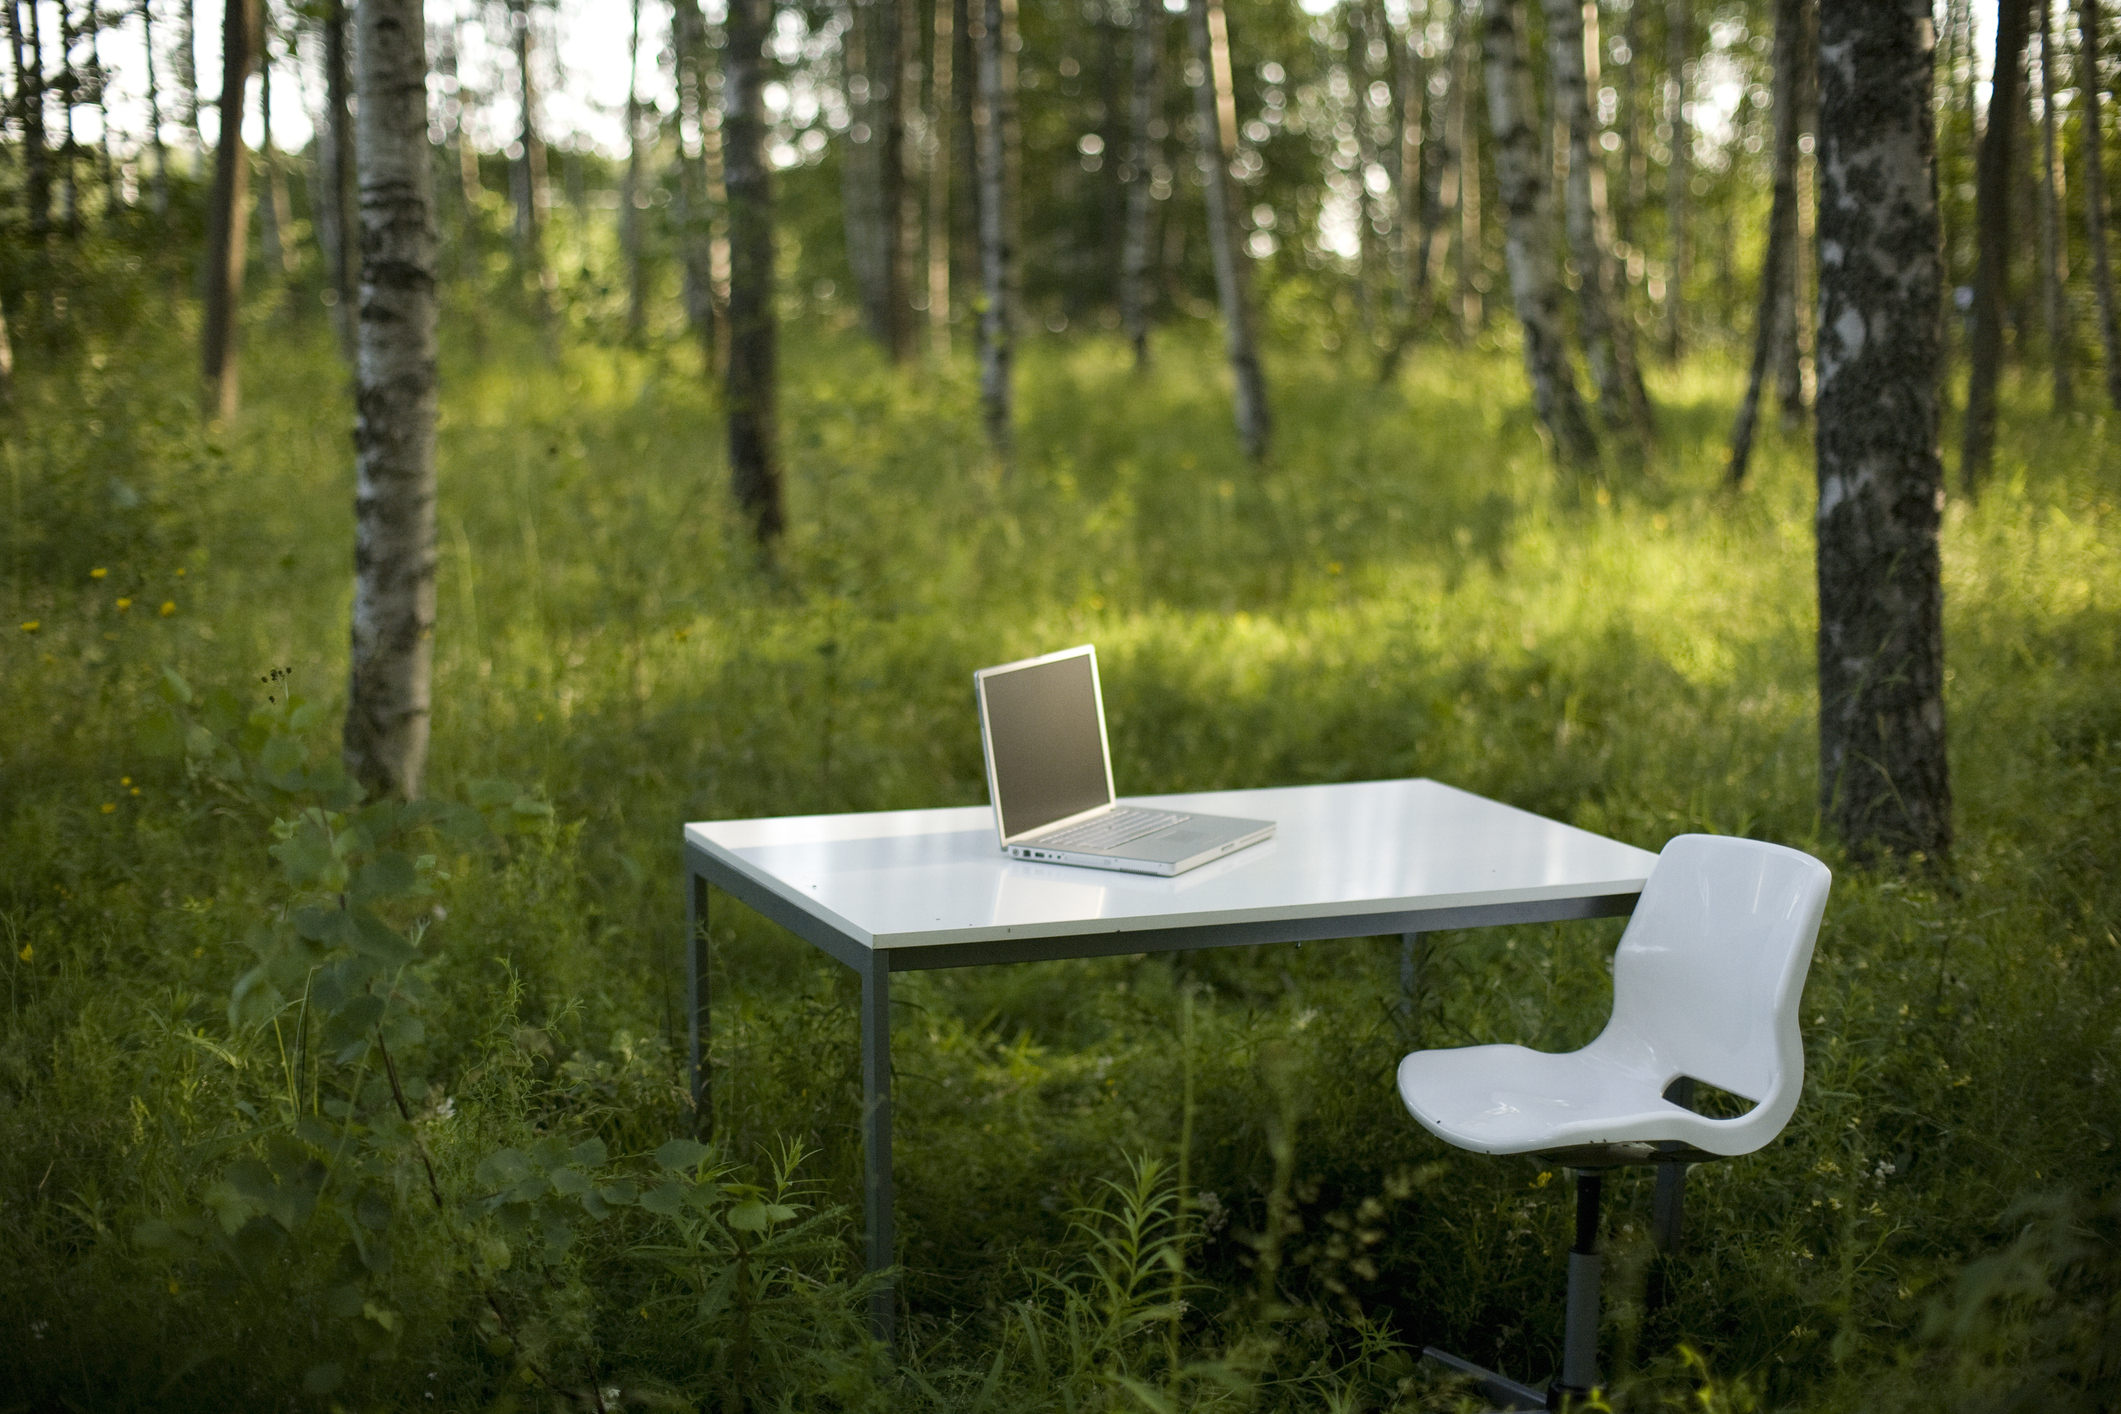 A computer desk in the middle of the woods